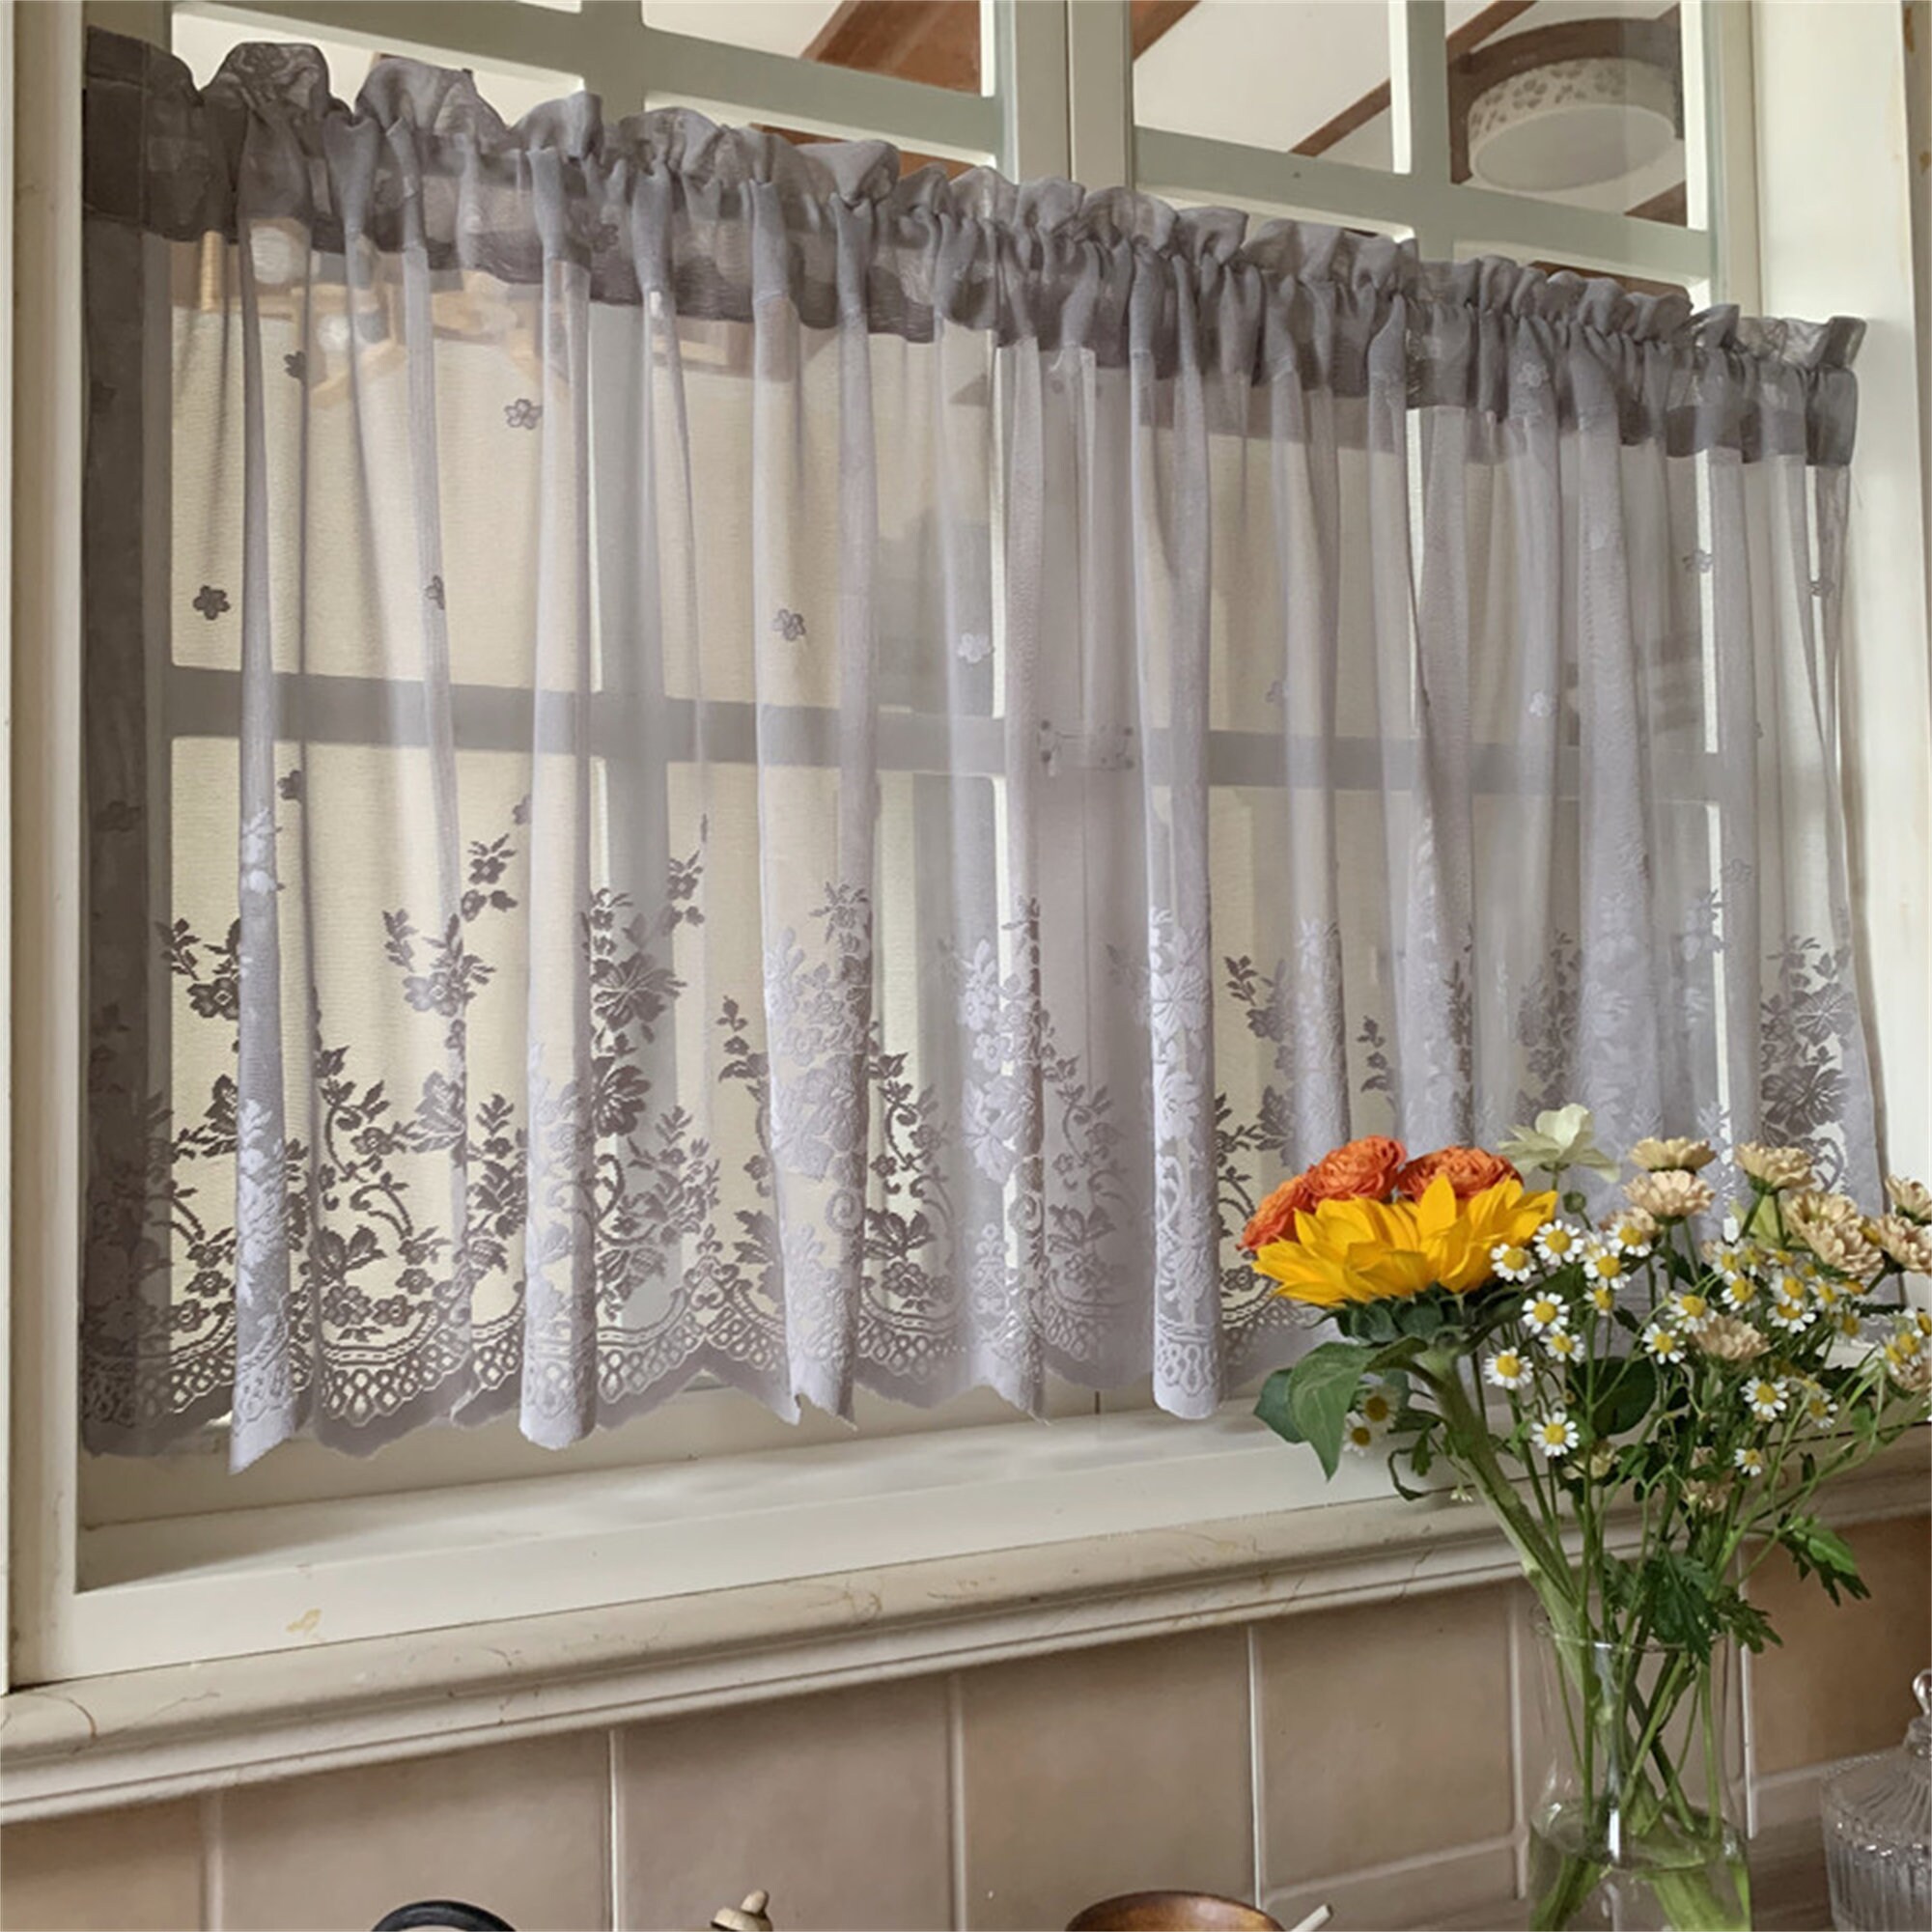 Swag & tiers Set Air-brushed By Hand of DAISY & BUTTERFLY Design on THICK SATIN FABRIC GOHD Cafe Curtain DAISY SWING 3pcs Kitchen Curtain 